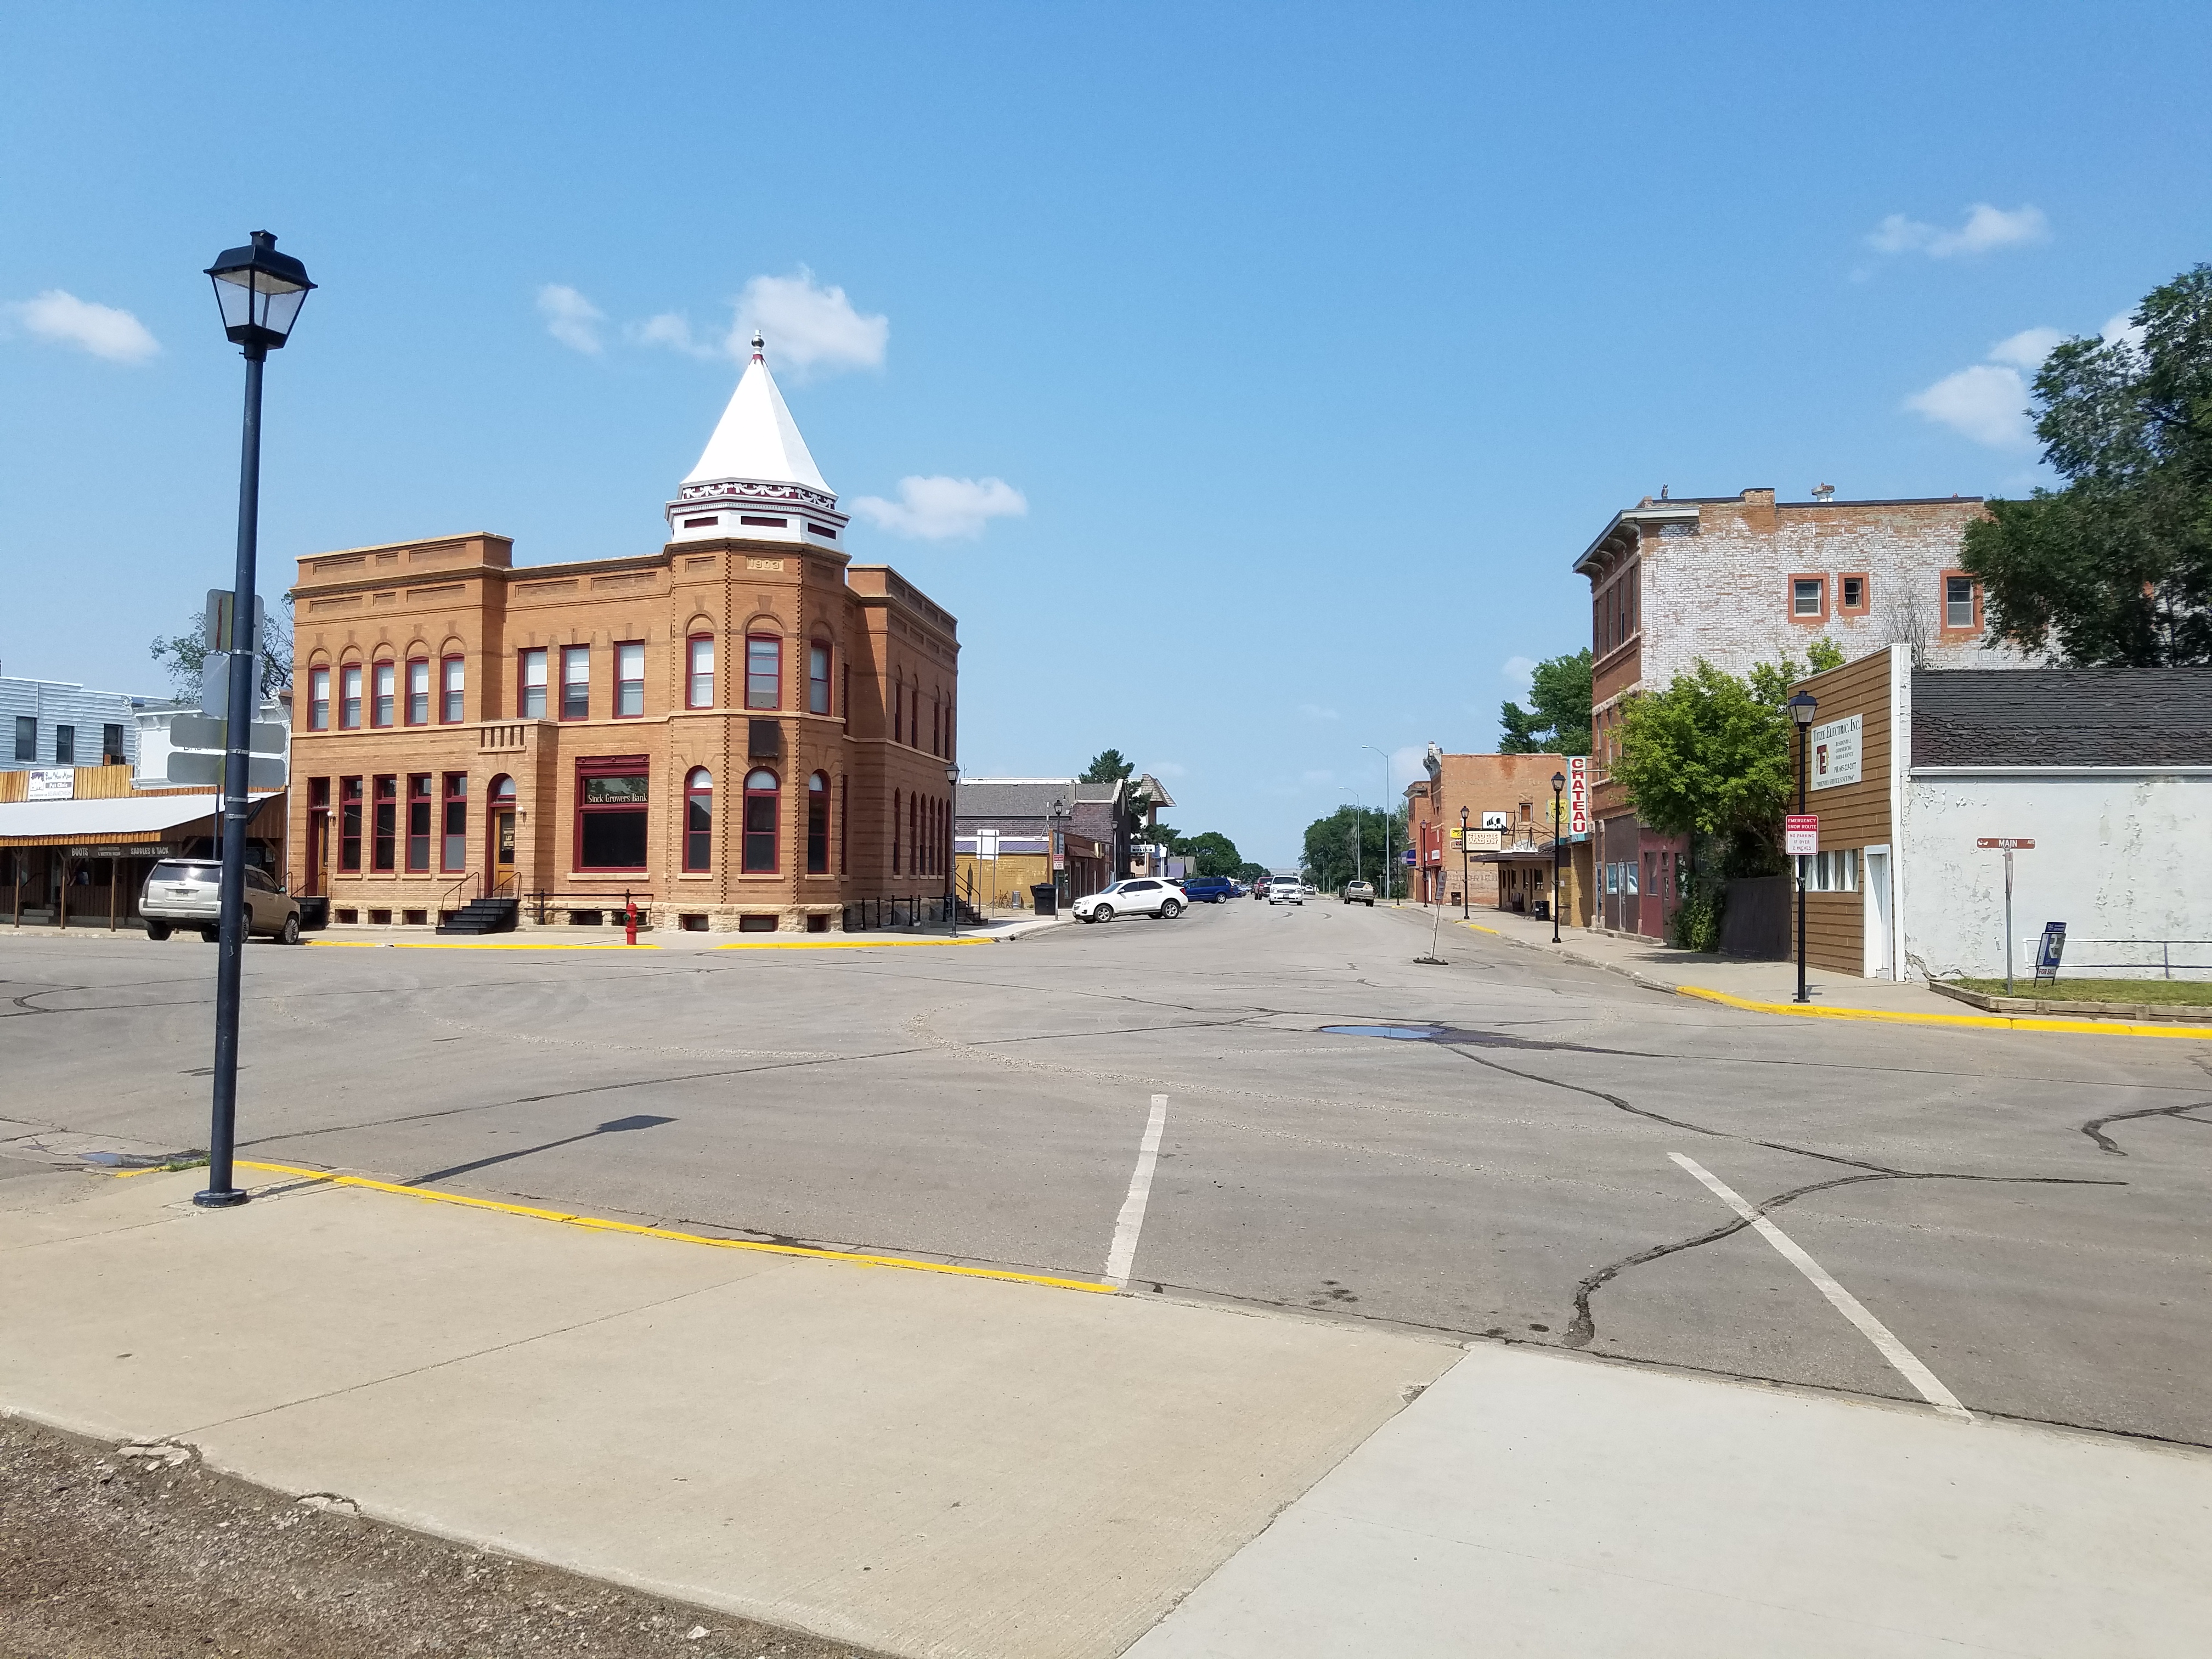 Fort Pierre City Council Approves Action To Sign Settlement Agreement In Legal Action Against City